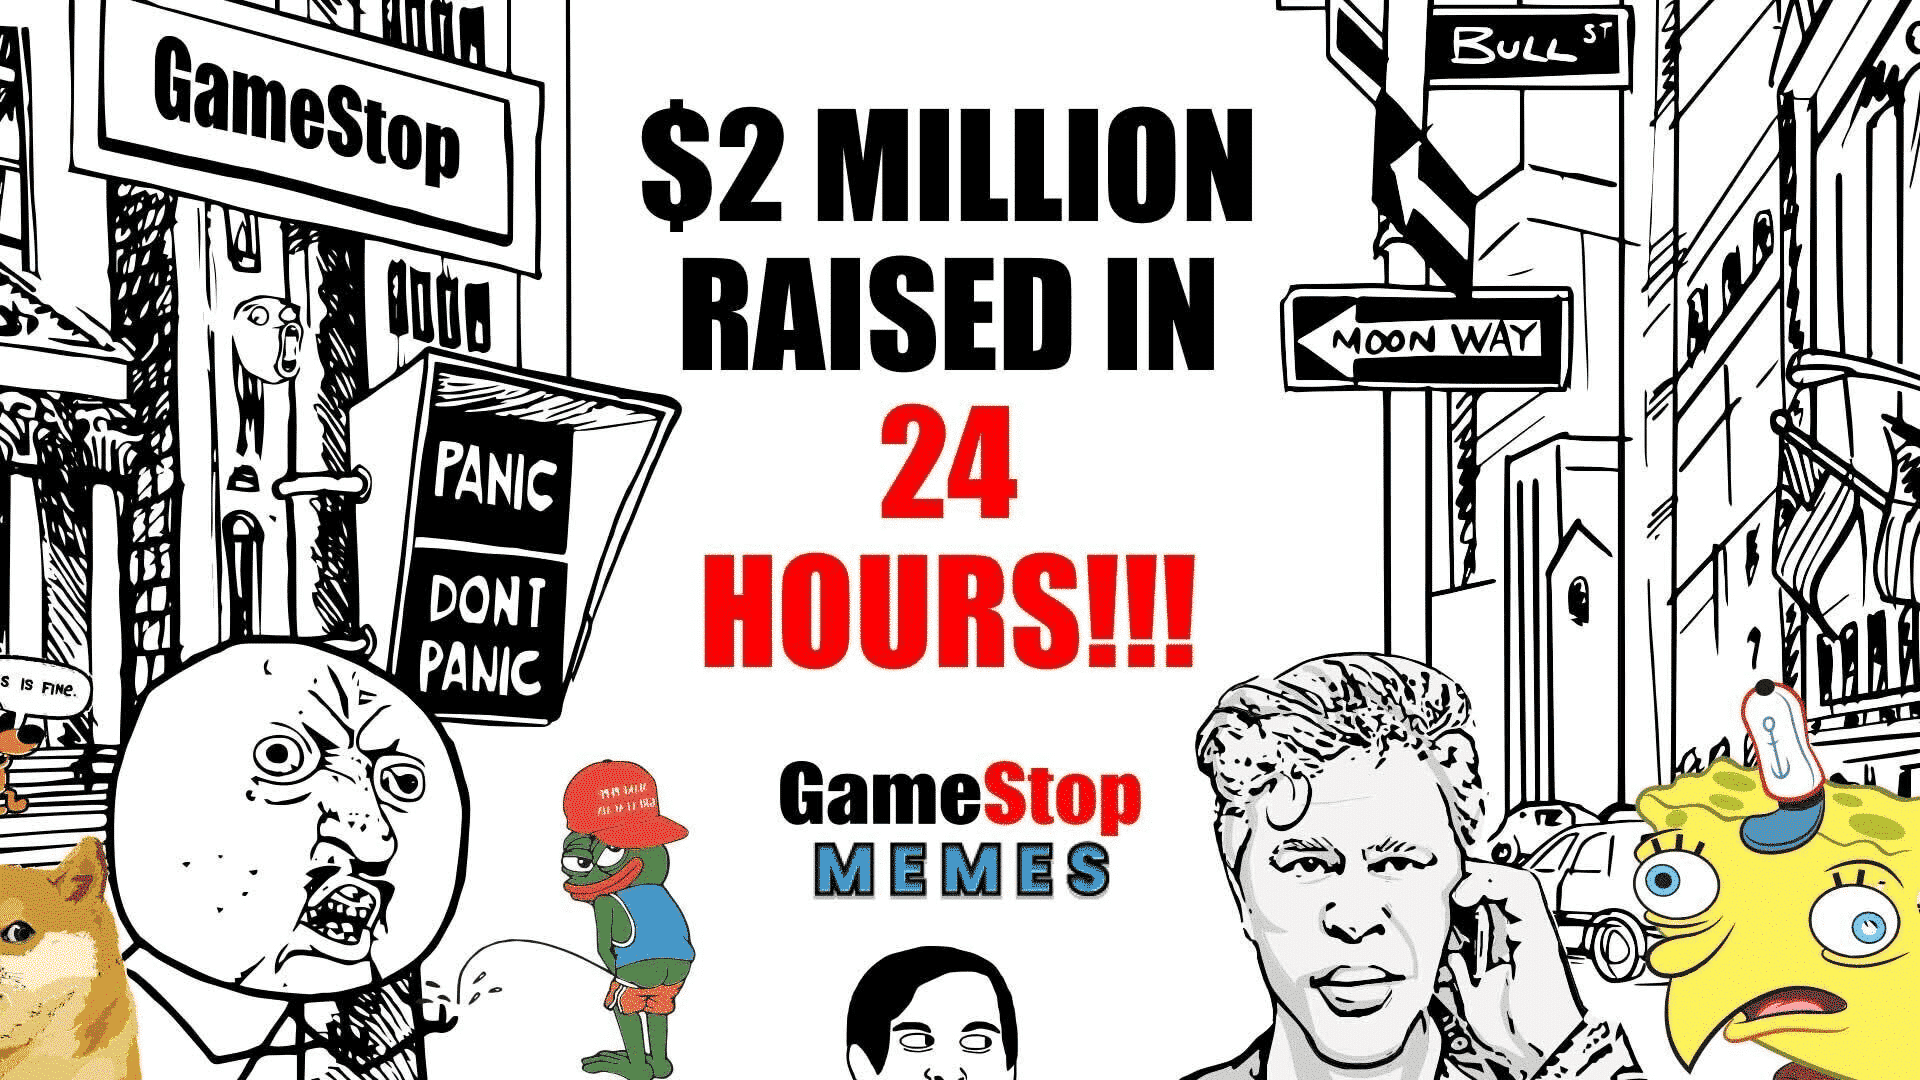 GameStop Memes Rockets: $2M in 24 Hrs! Bitcoin Aims At $175k Mark As Ethereum Surges